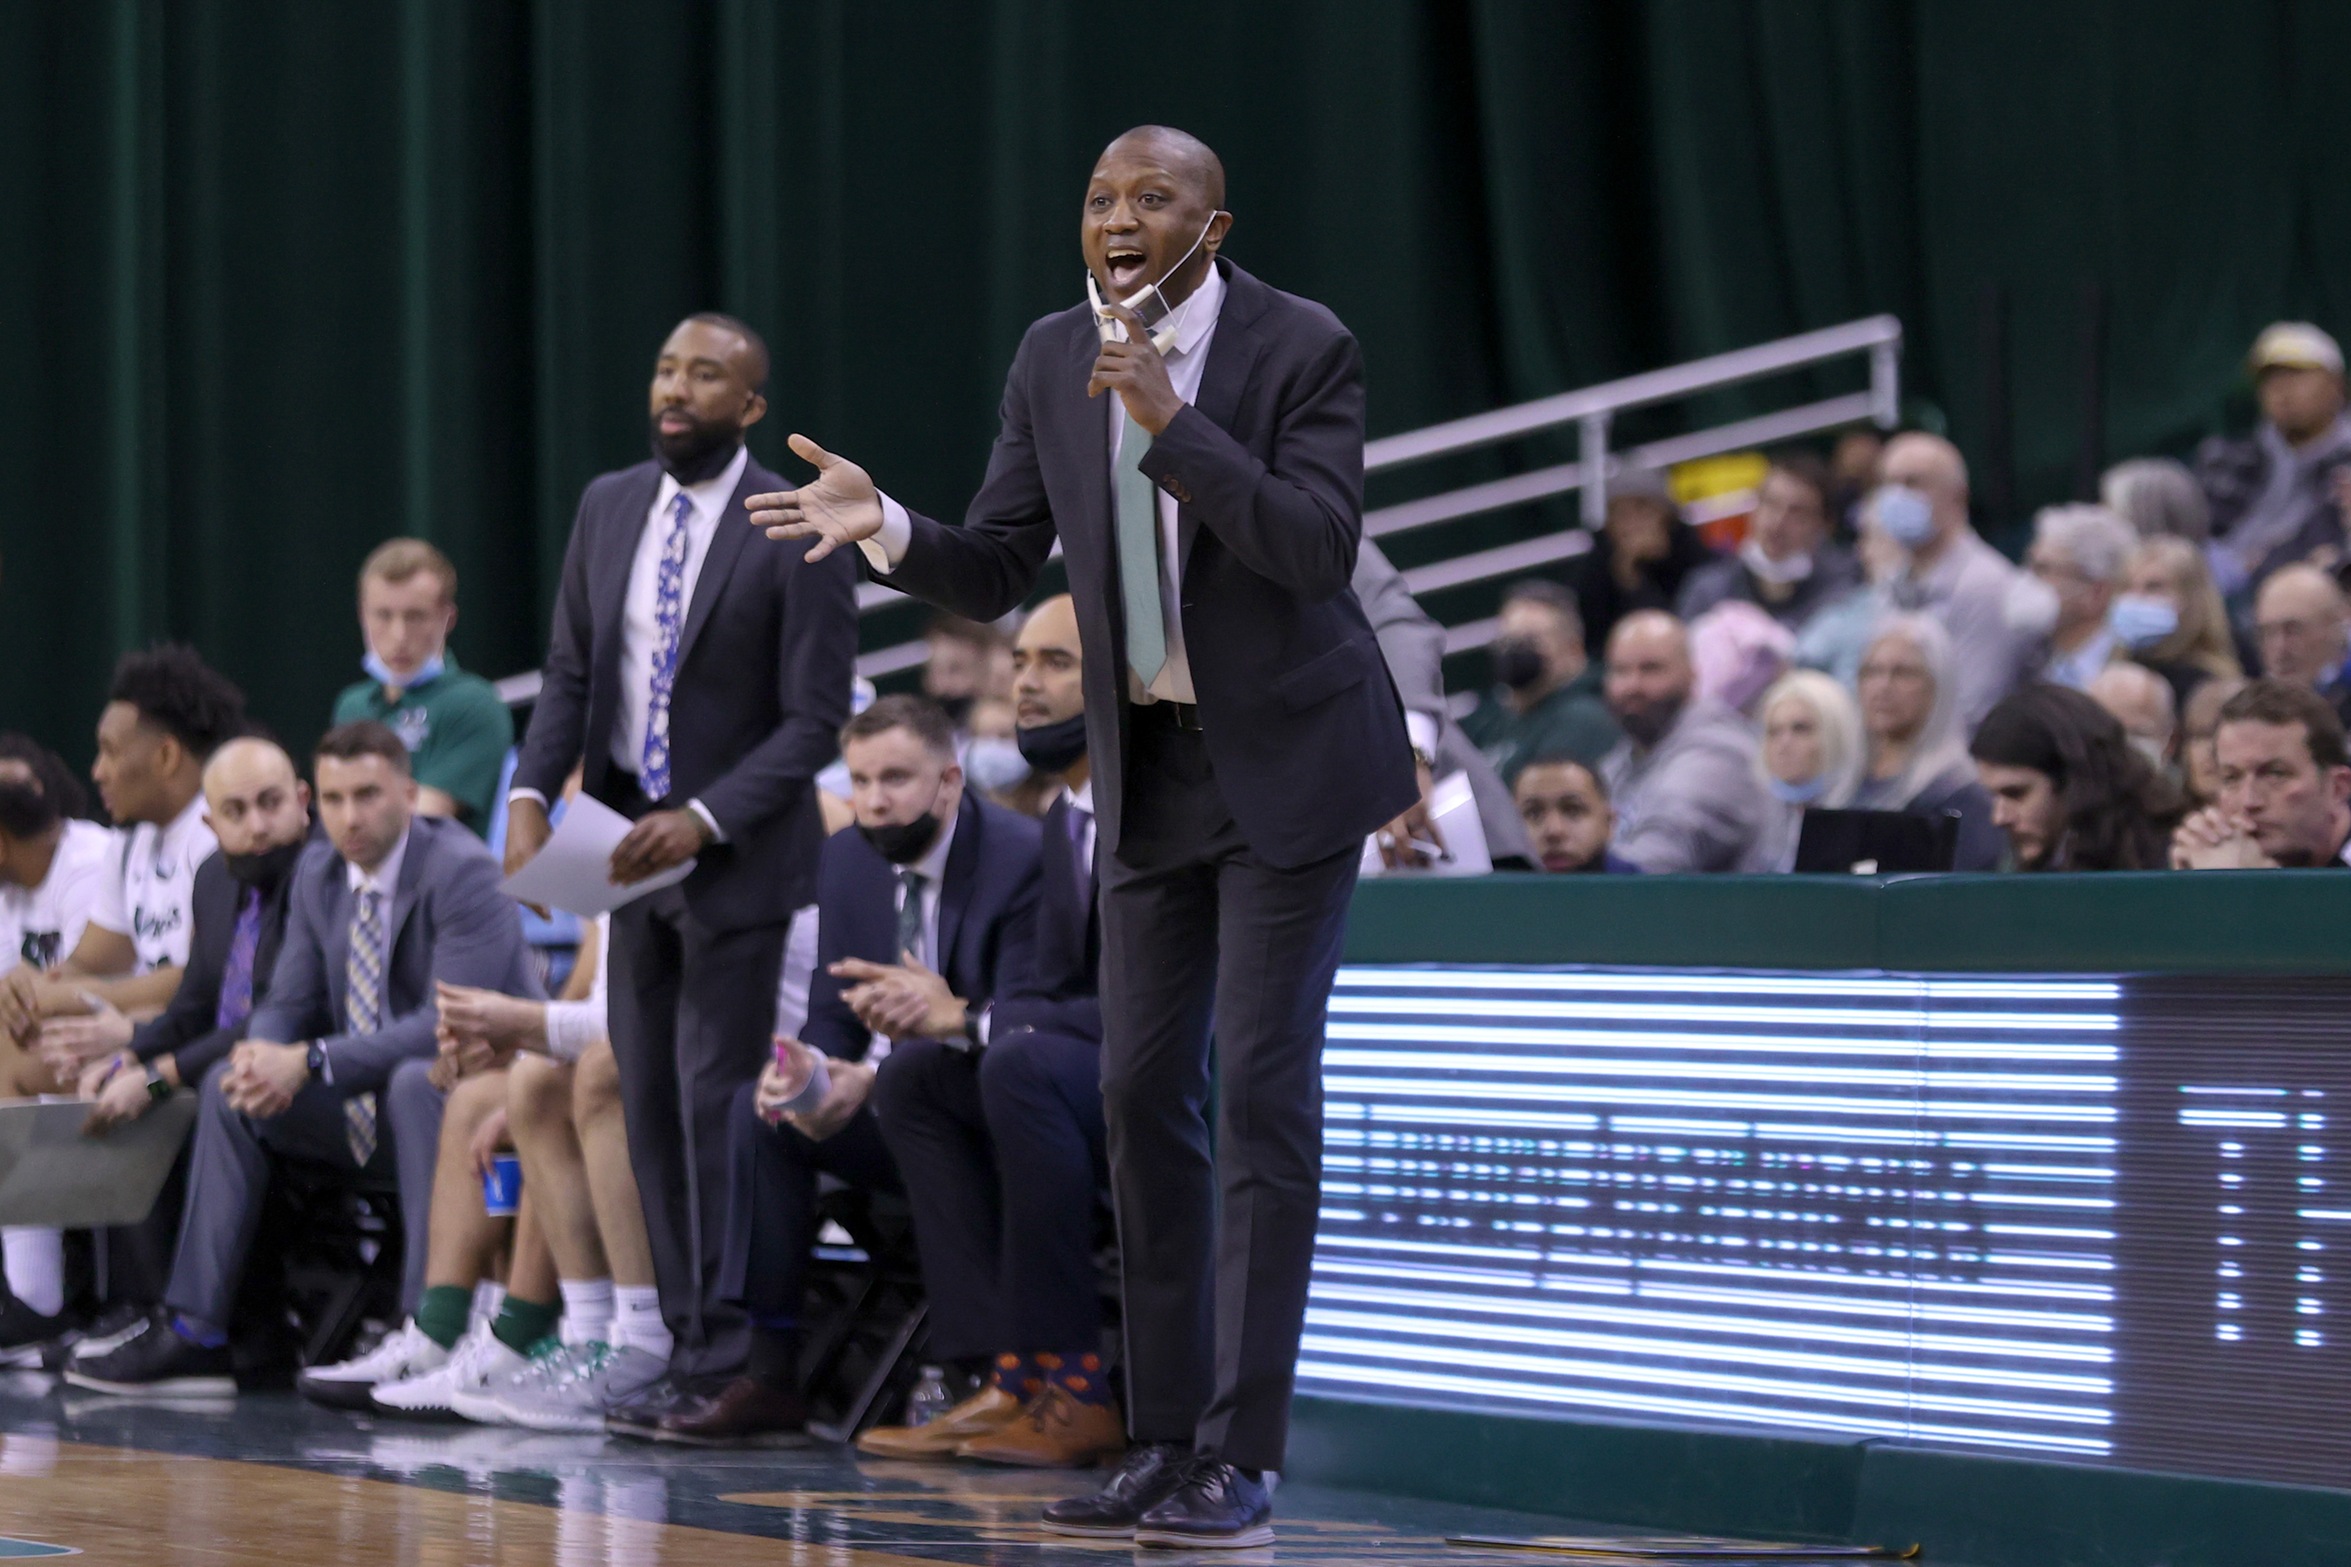 Men’s Basketball headed to Indy for Horizon League Semifinals